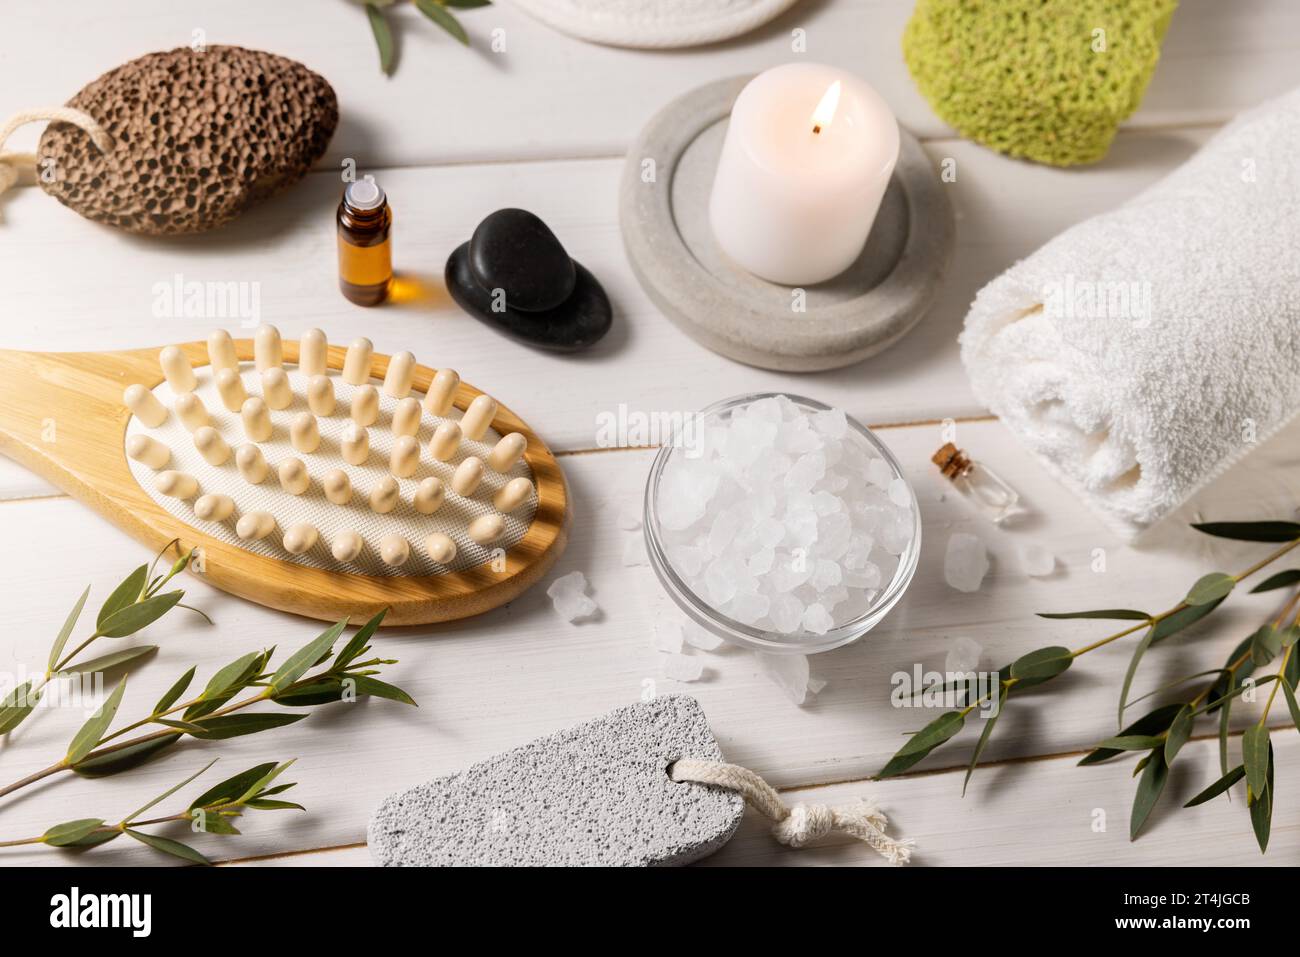 spa beauty treatment. group of skin care items on white wooden table Stock Photo